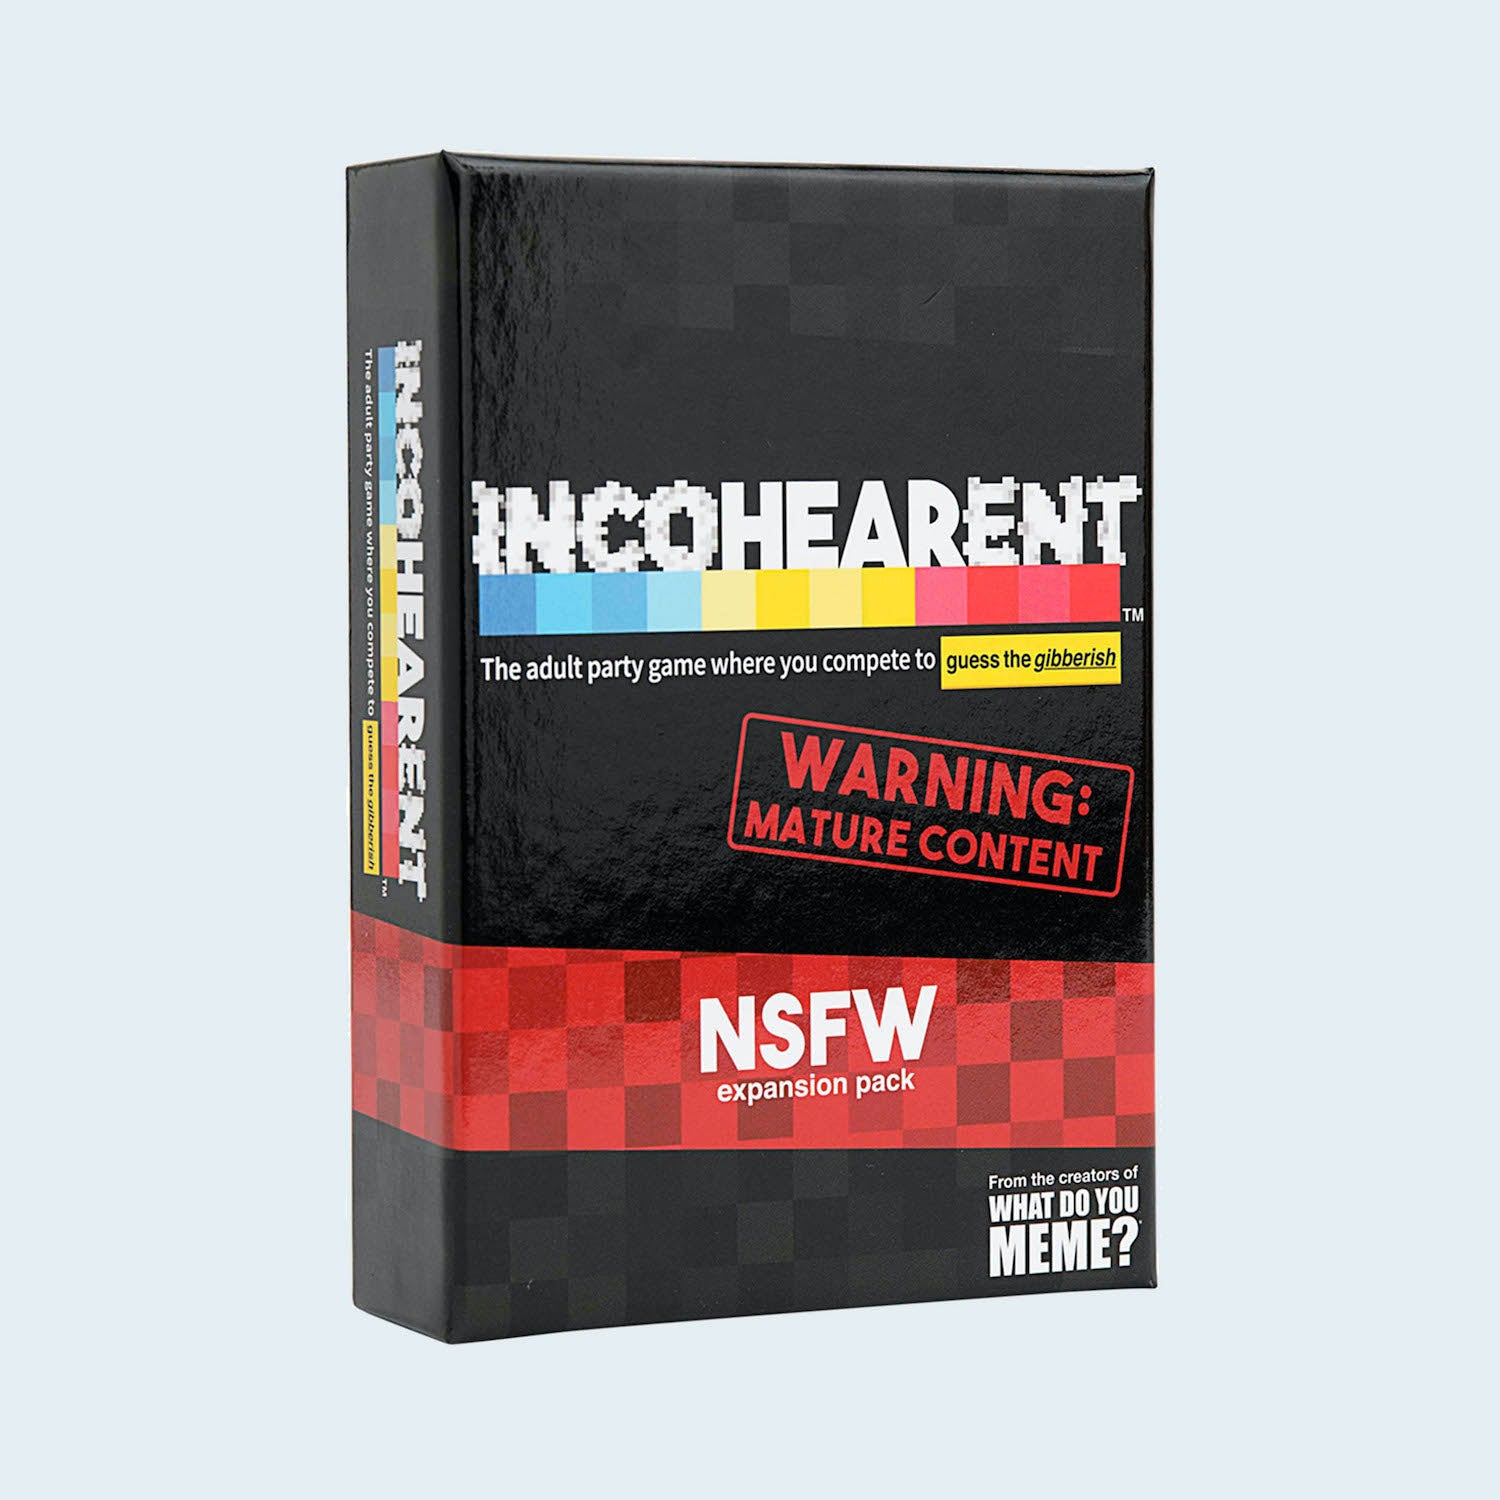 incohearent-nsfw-expansion-pack-game-box-and-game-play-01-what-do-you-meme-by-relatable